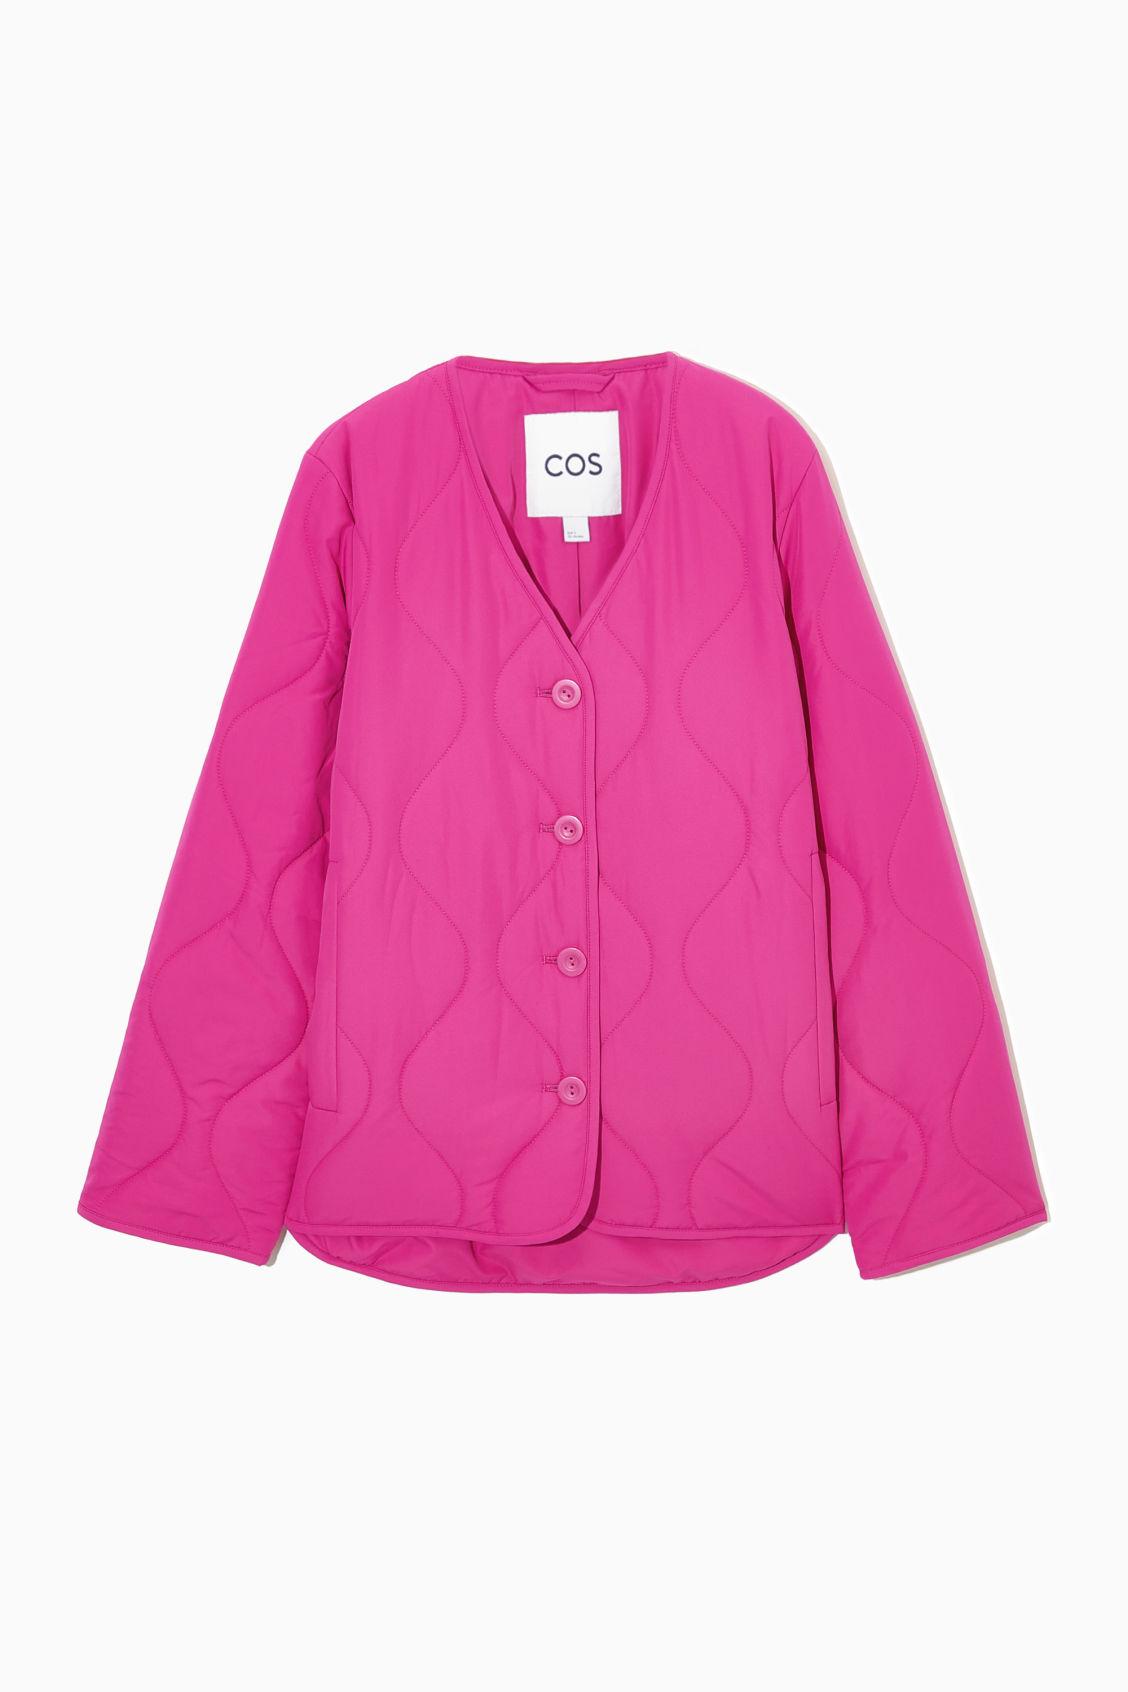 COS Padded Liner Jacket in Pink | Lyst